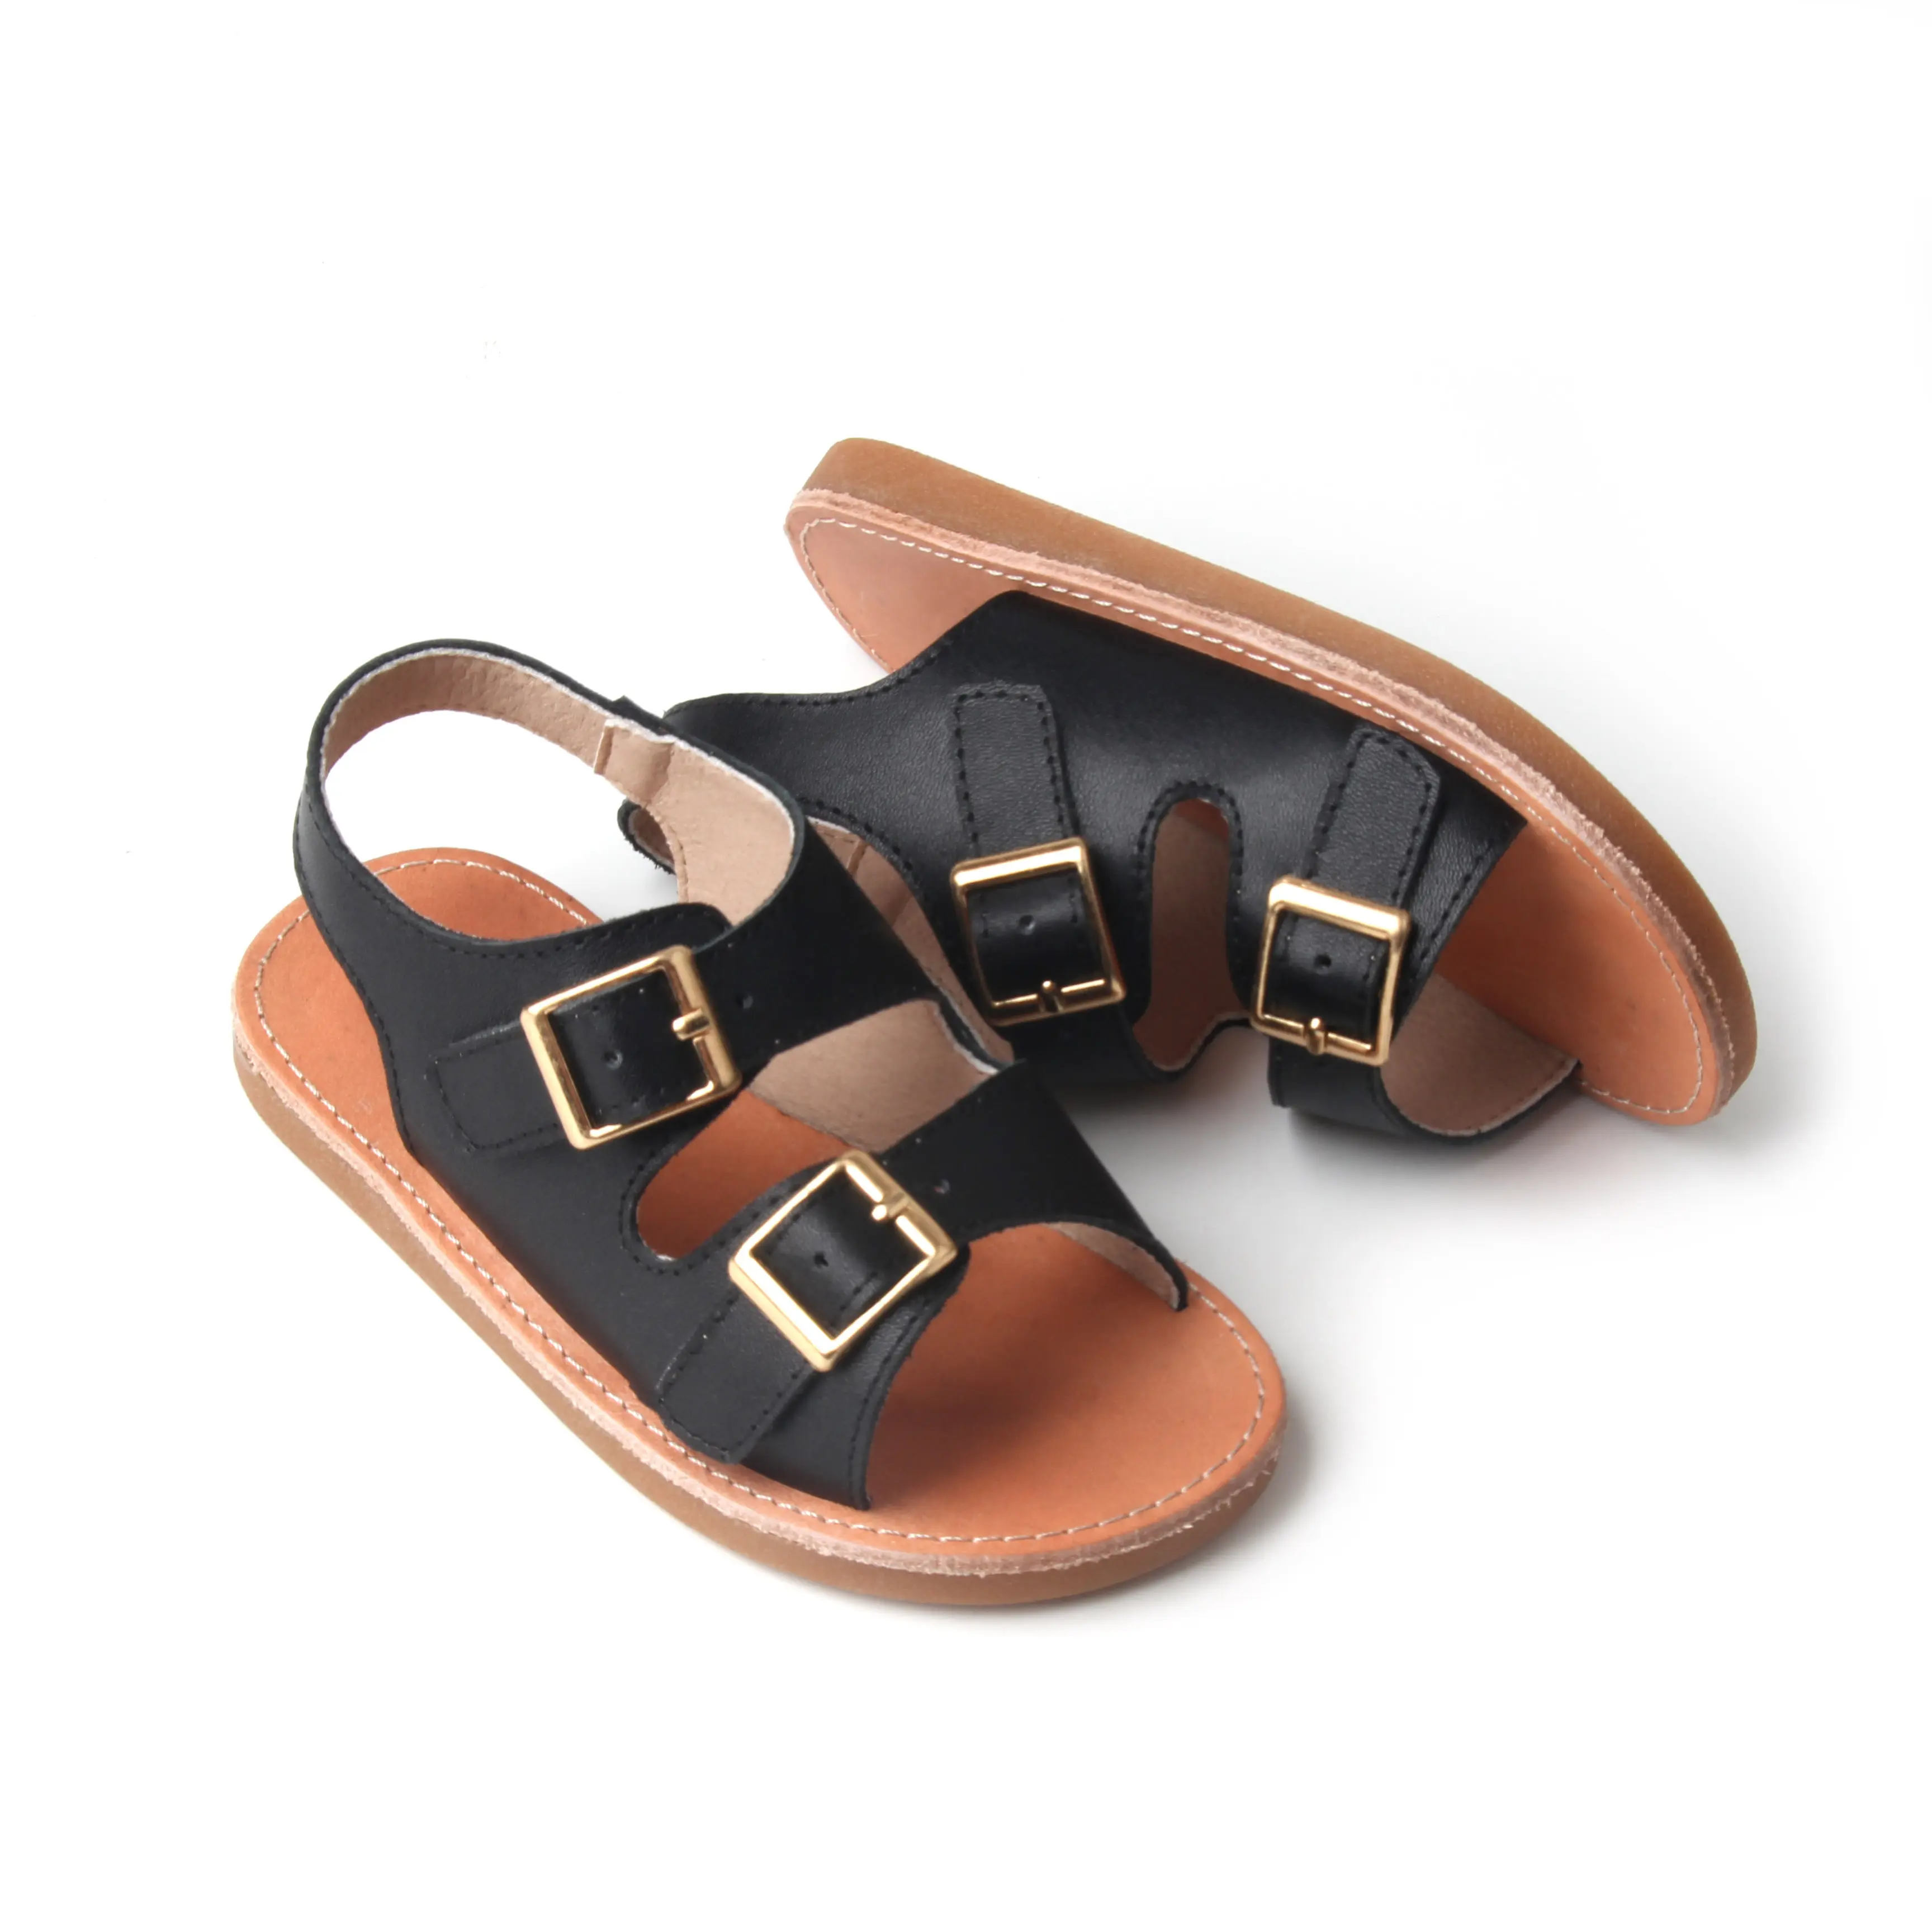 Mix Colors Shoes Handmade Leather Wholesale Sandals For Kids